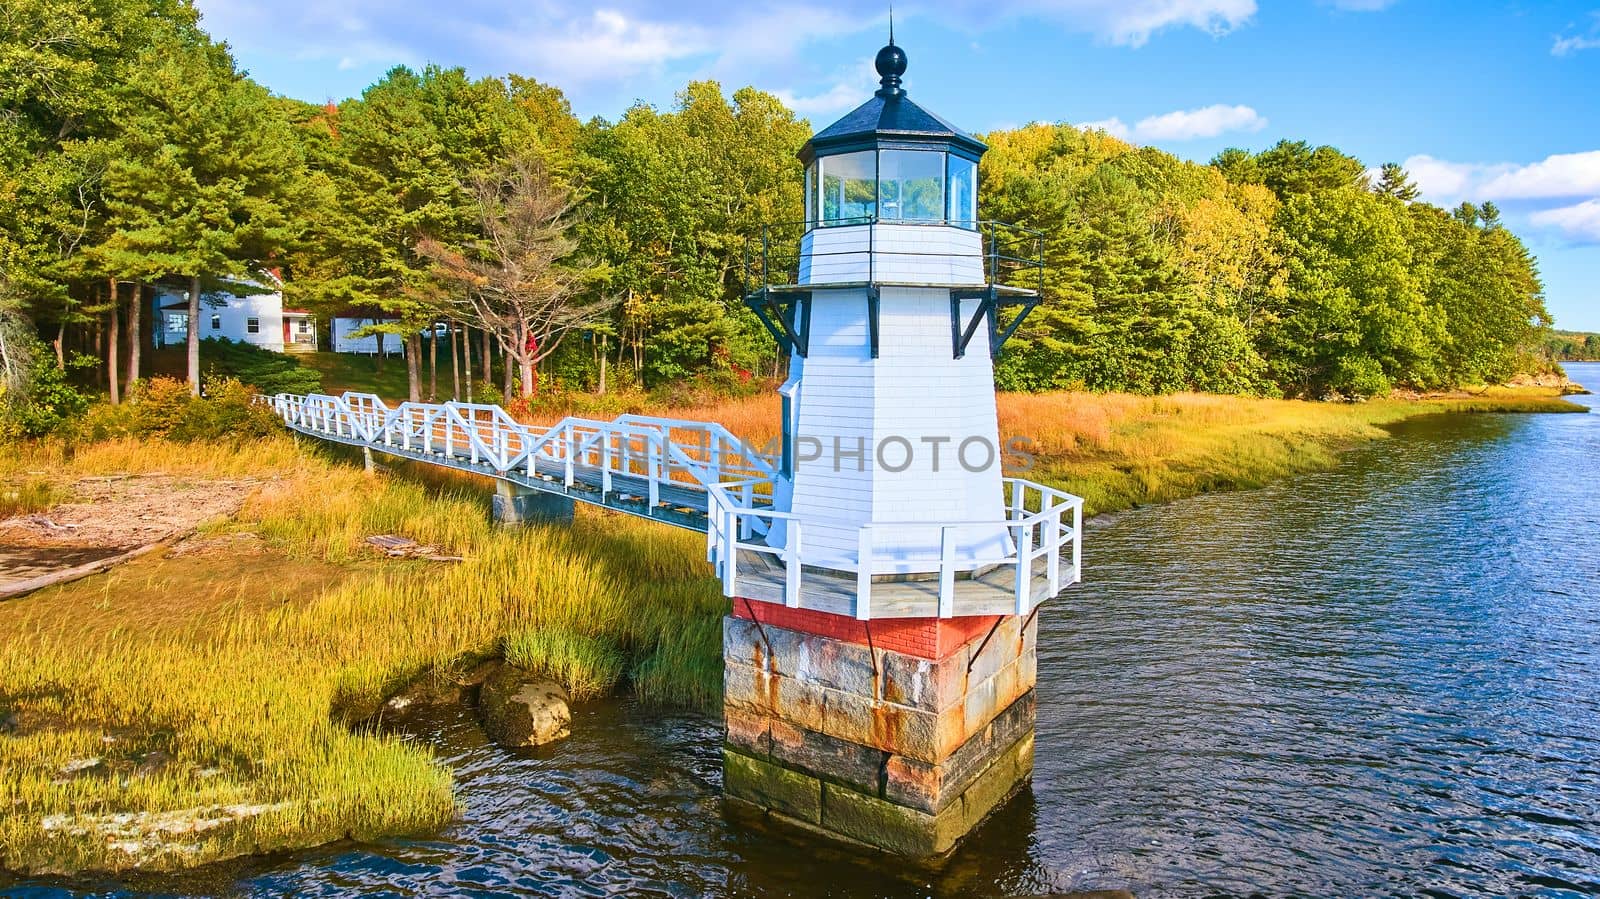 Image of Adorable tiny lighthouse on Maine coast with walkway and fall foliage